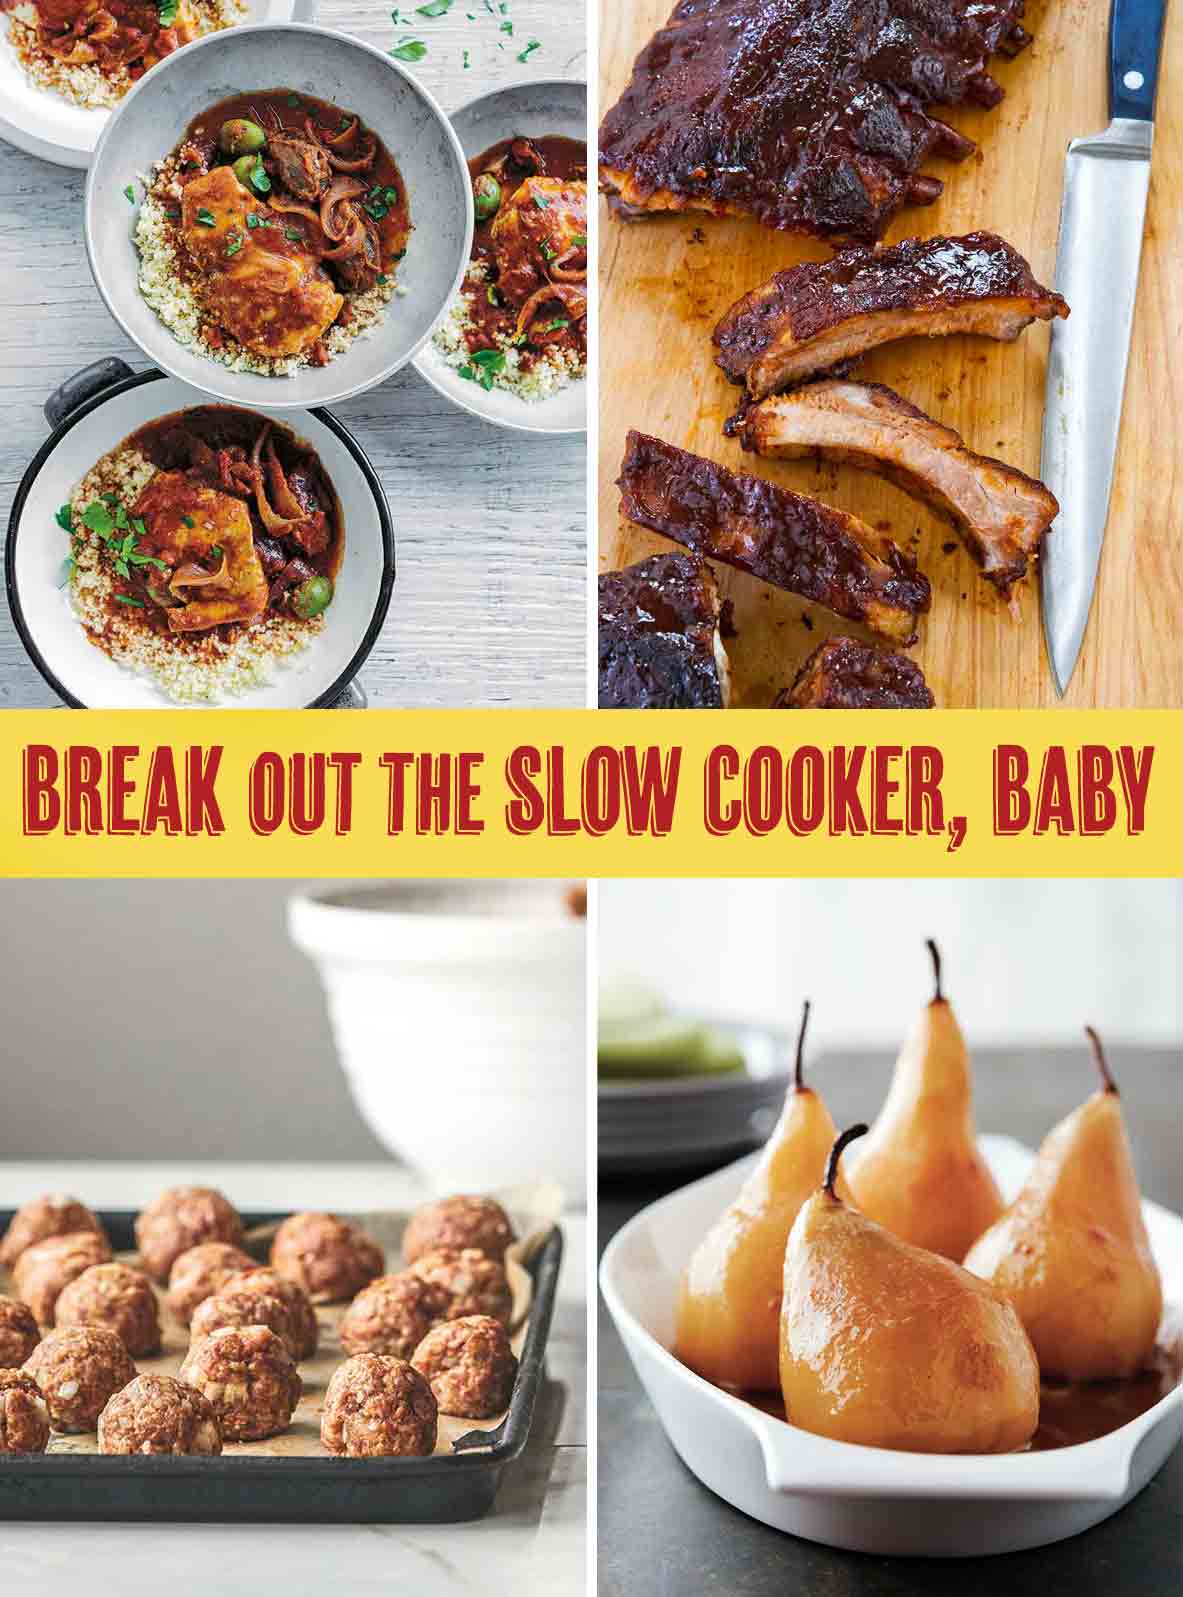 Four bowls of slow cooker chicken tagine, a slab of ribs on a cutting. board with a knife beside them, meatballs on a baking sheet, and four poached pears in a white bowl.